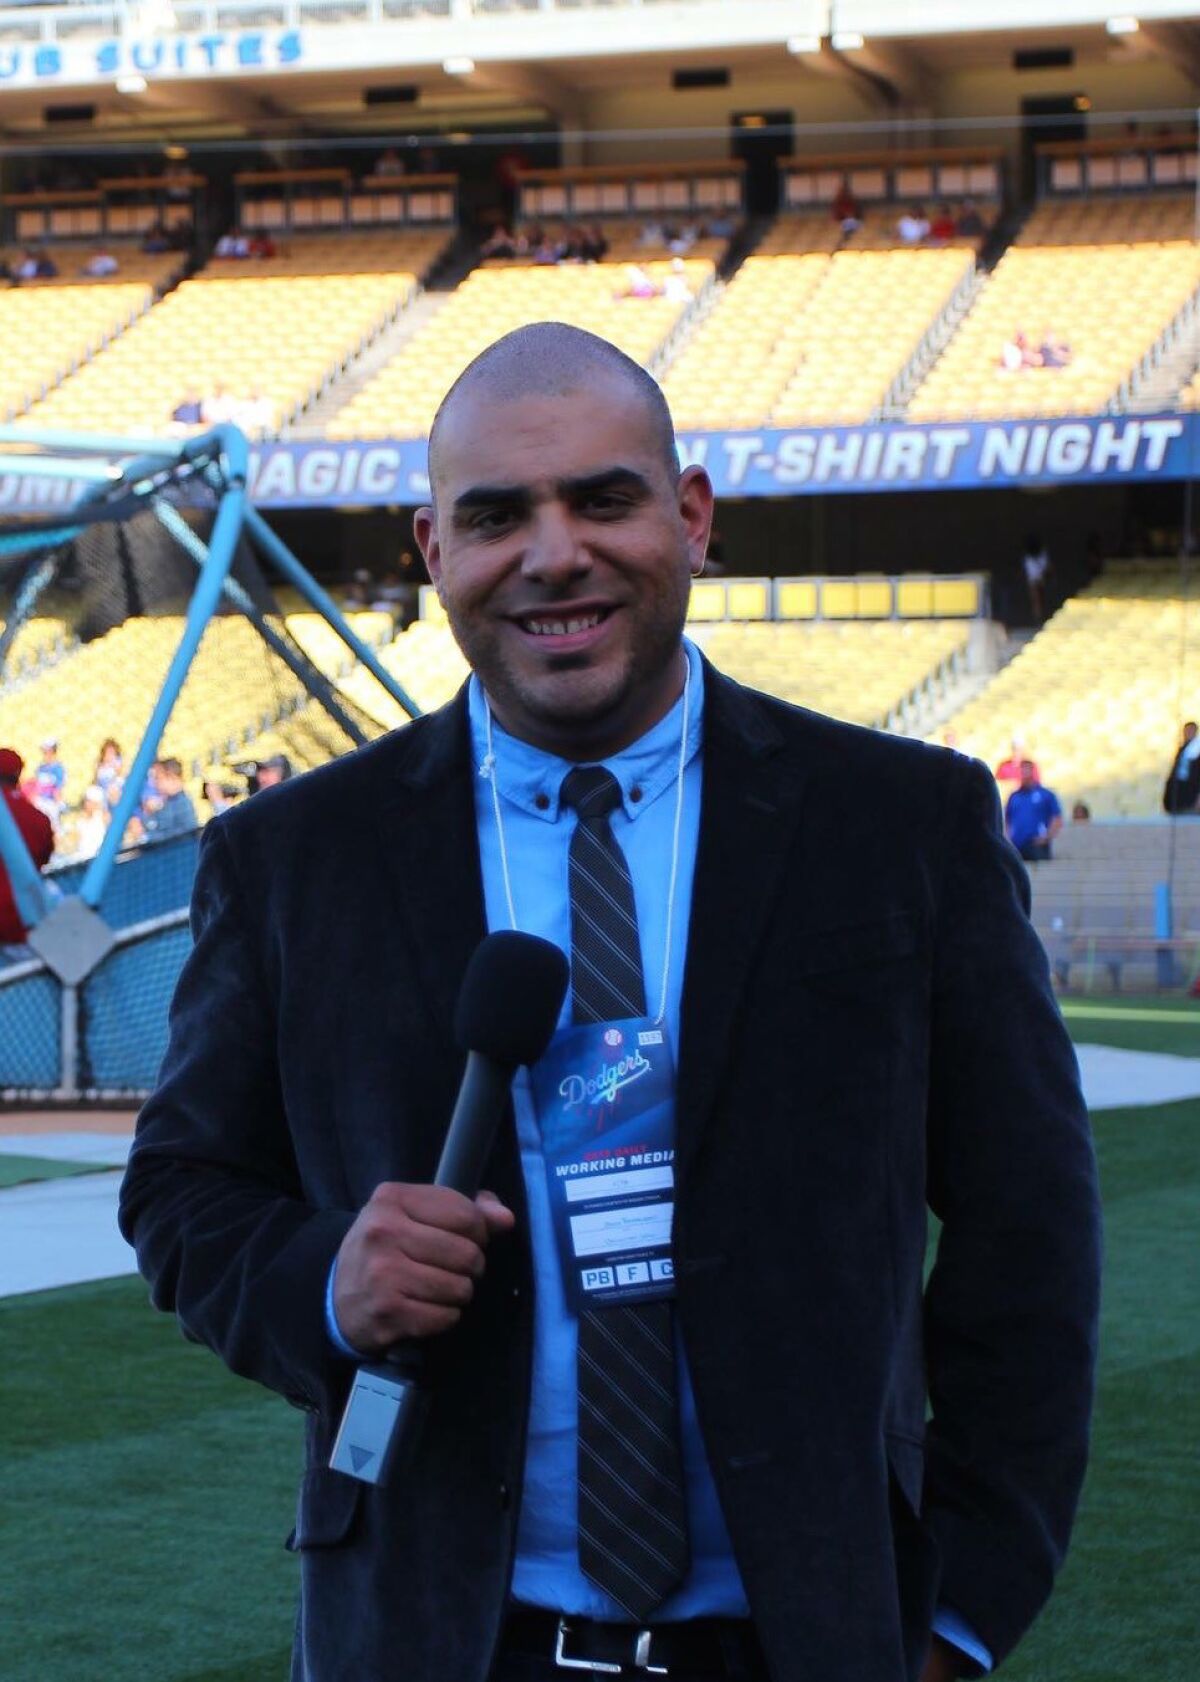 Jason Barquero covers a Dodgers game as a freelance reporter in 2013.